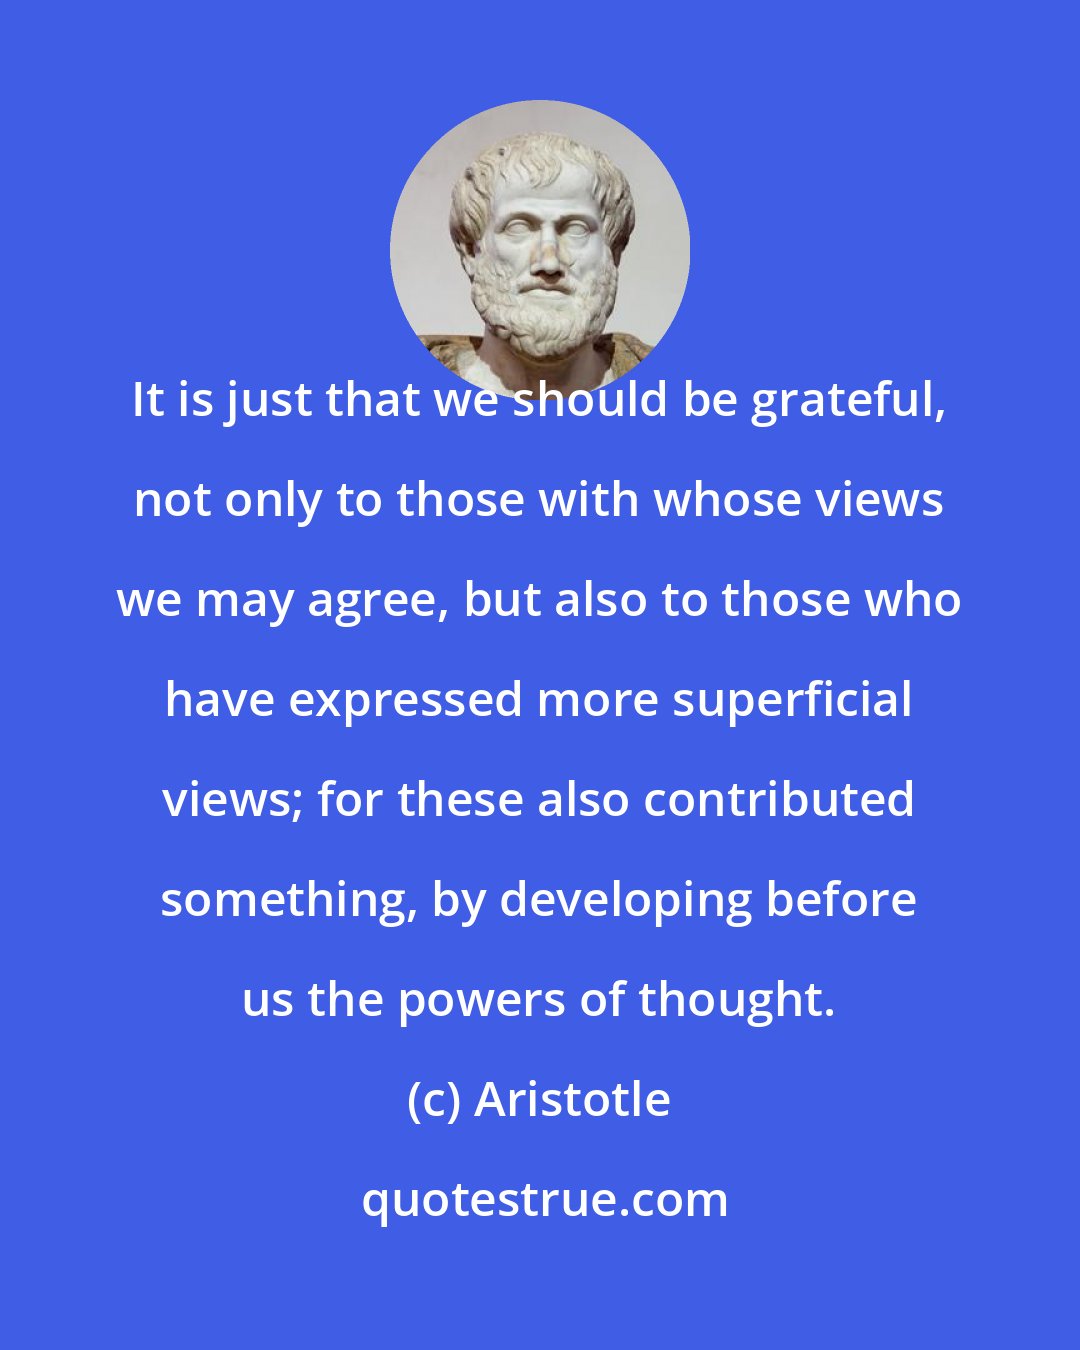 Aristotle: It is just that we should be grateful, not only to those with whose views we may agree, but also to those who have expressed more superficial views; for these also contributed something, by developing before us the powers of thought.